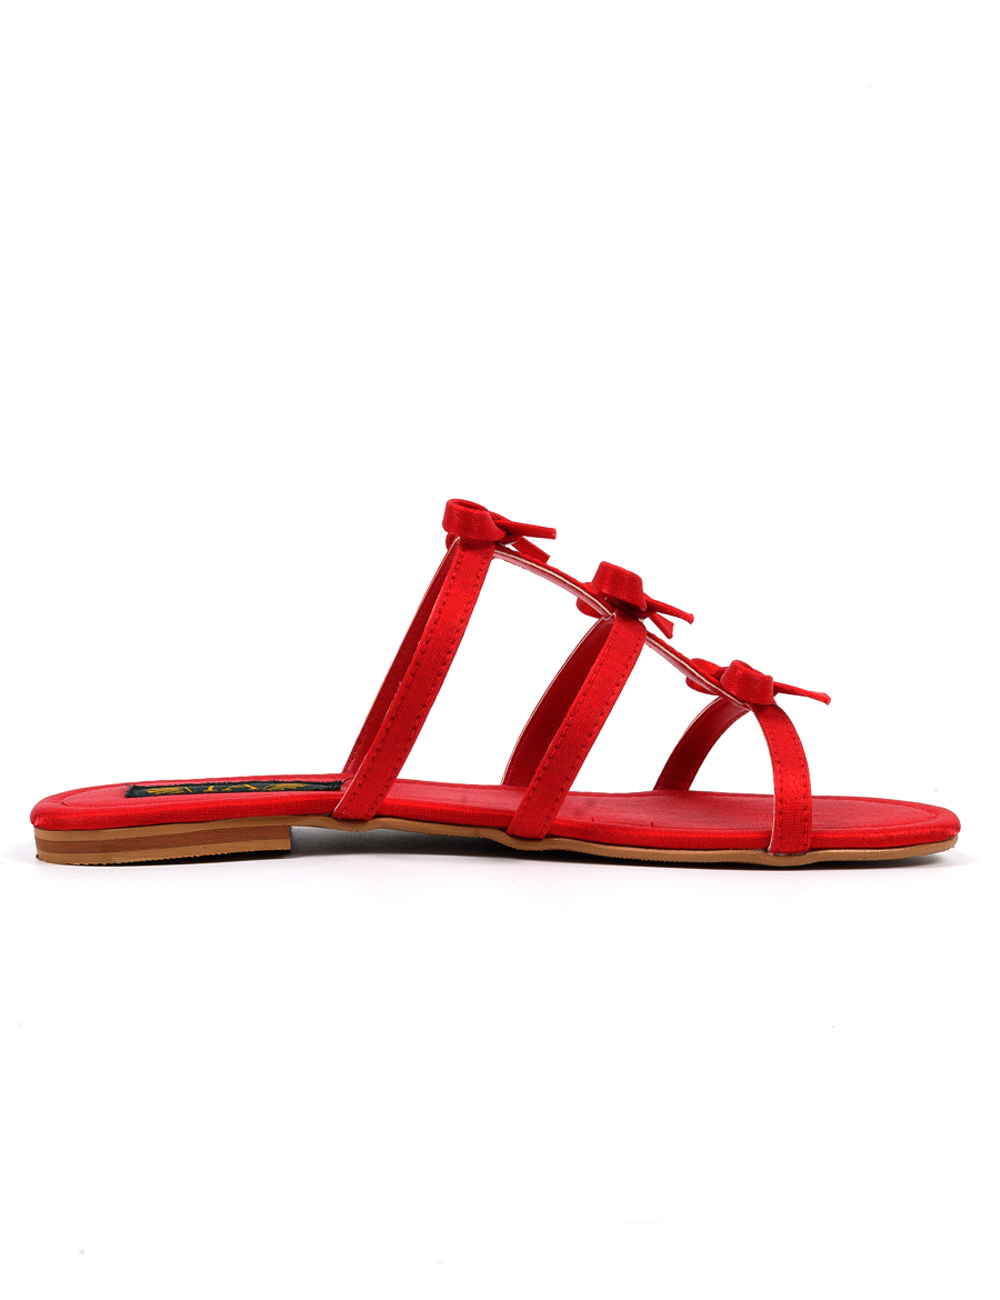 Red Semi Casual Slippers